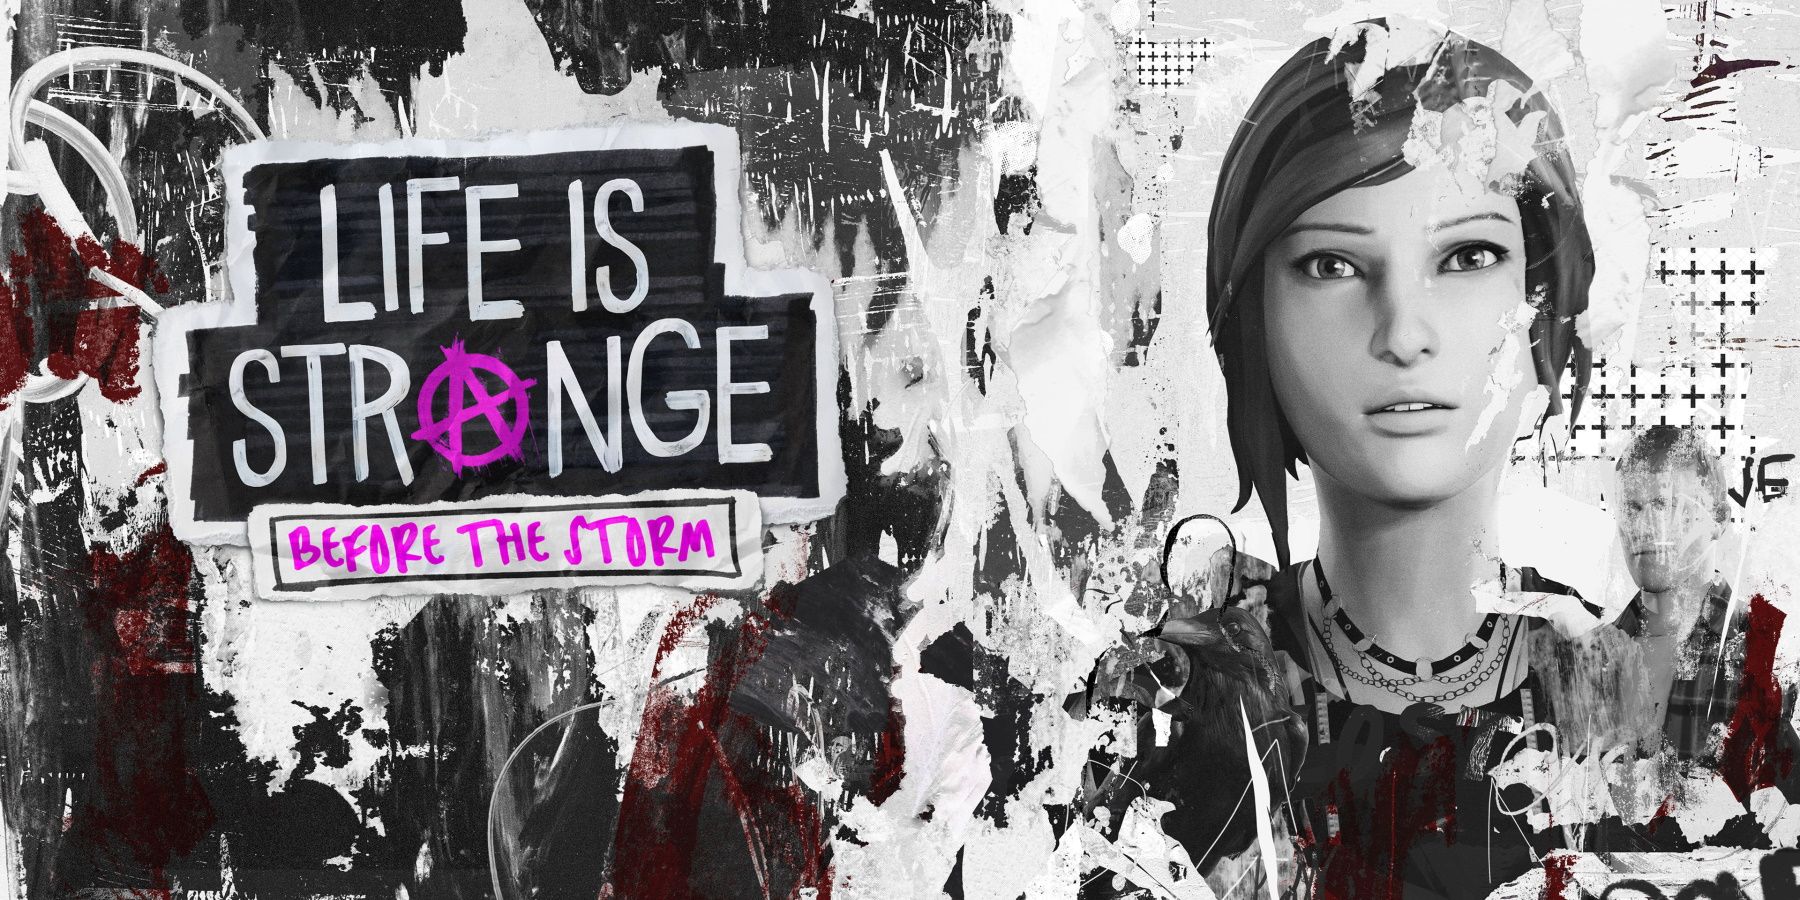  Life is Strange Before the Storm cover art with chloe price